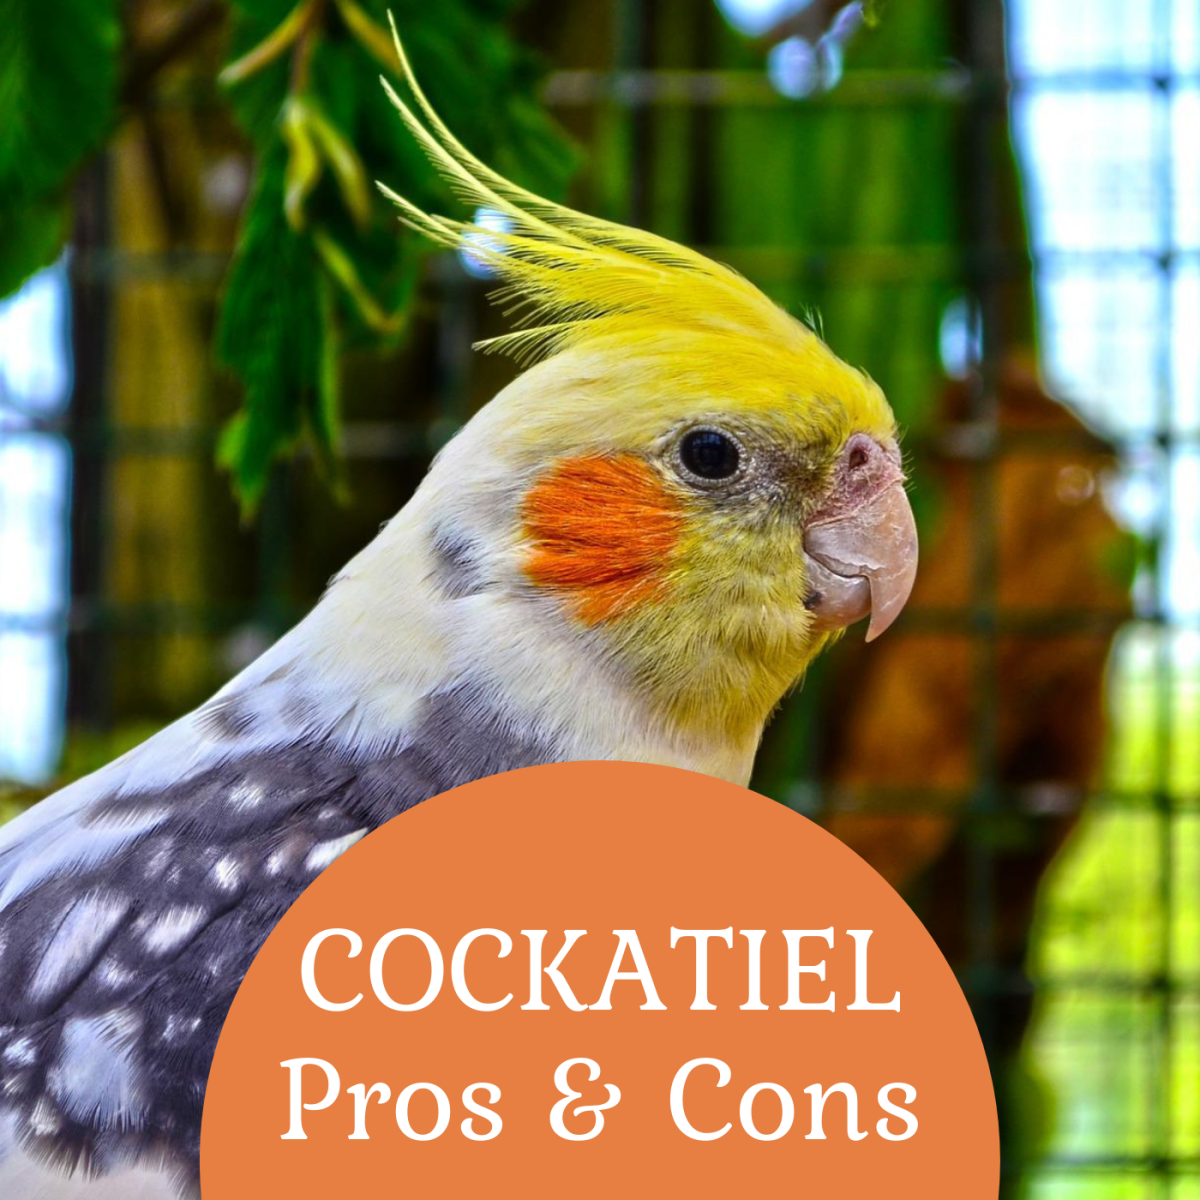 Pros and Cons of Cockatiels as Pets